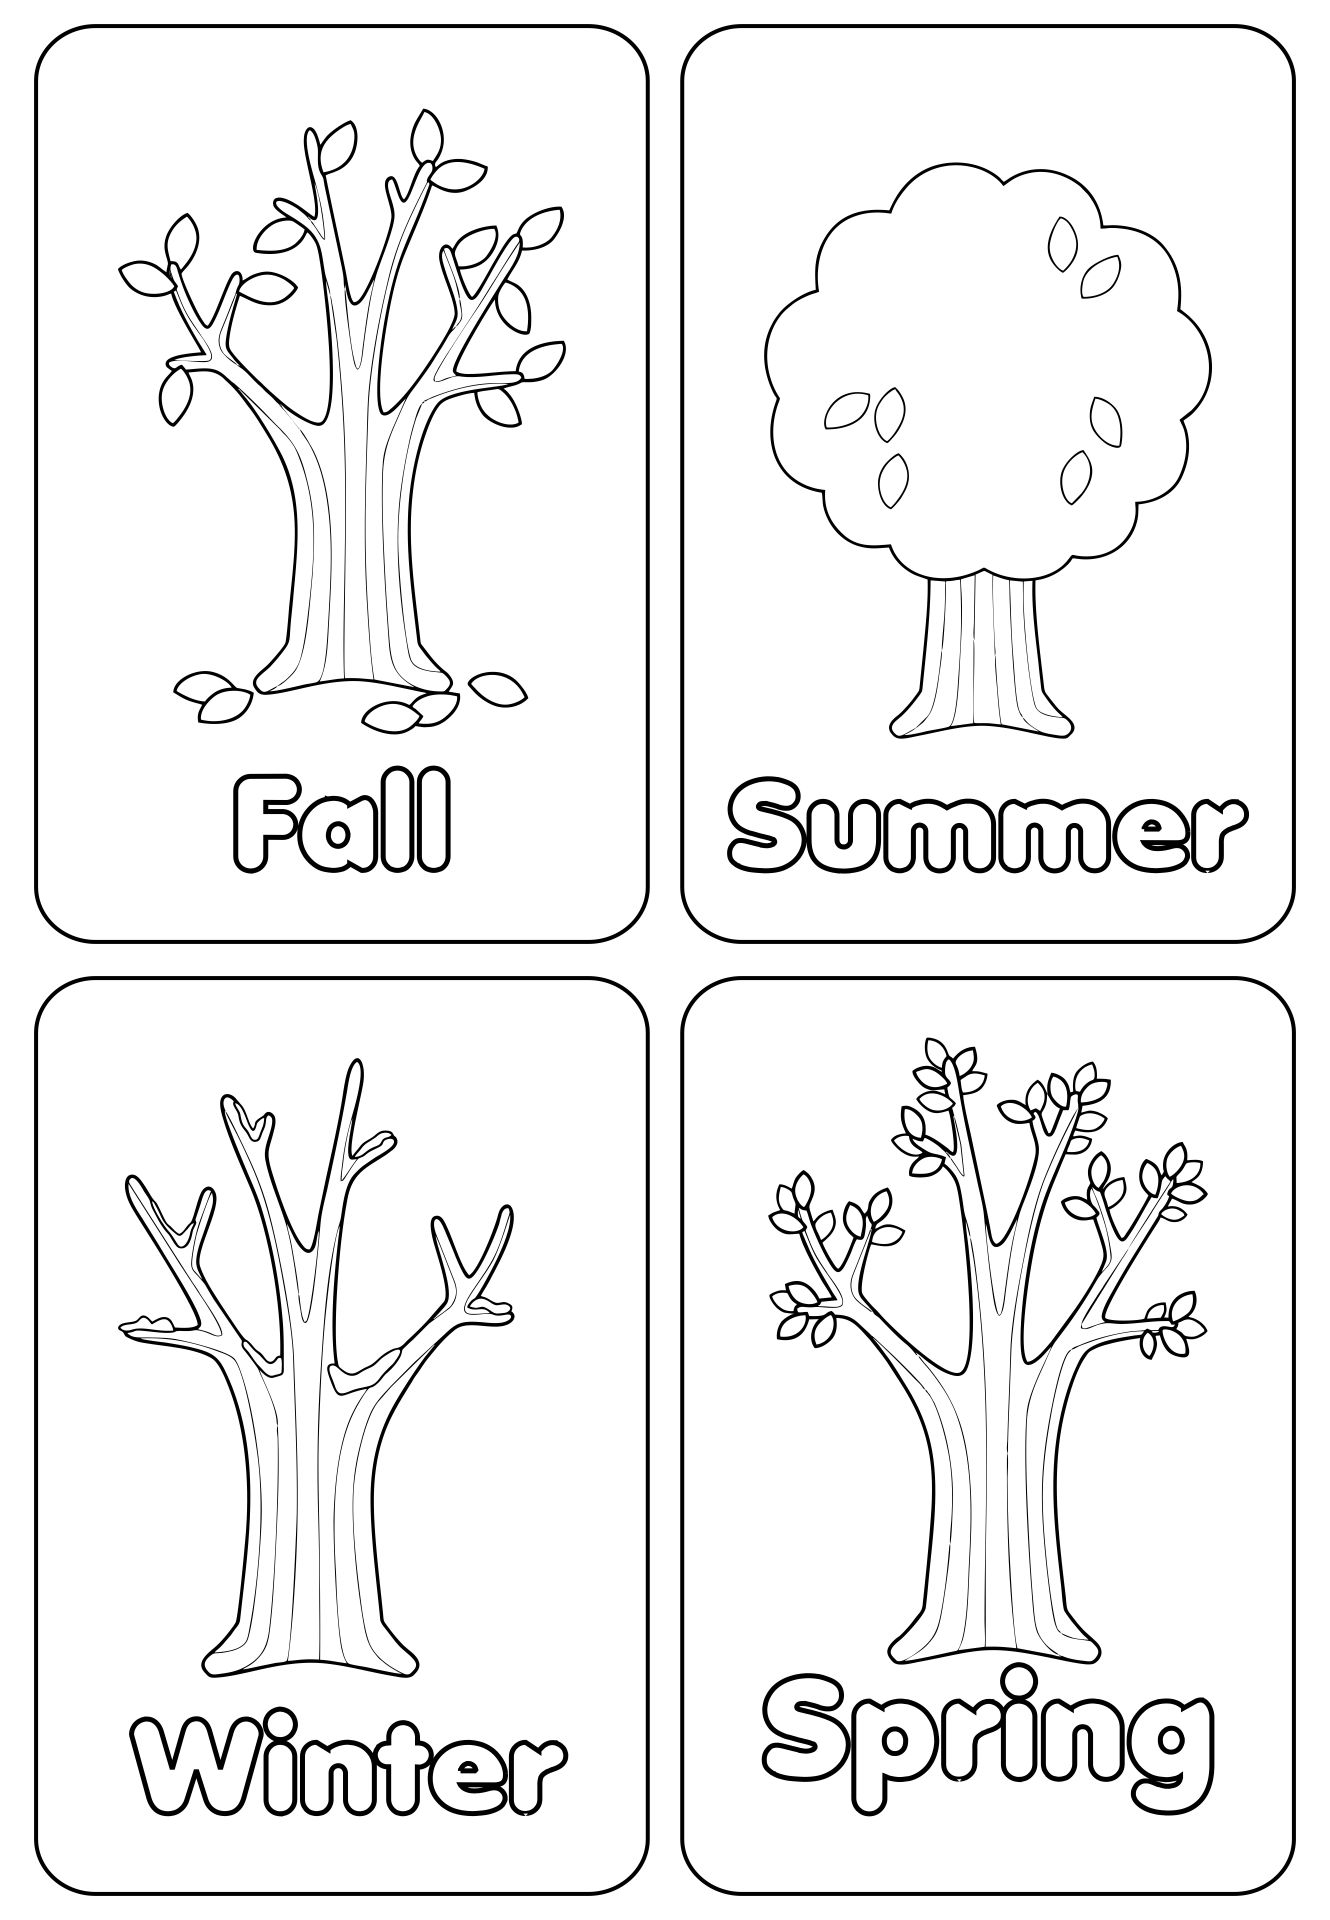 6 Best Images of Seasons Preschool Coloring Pages Printables - Four ...